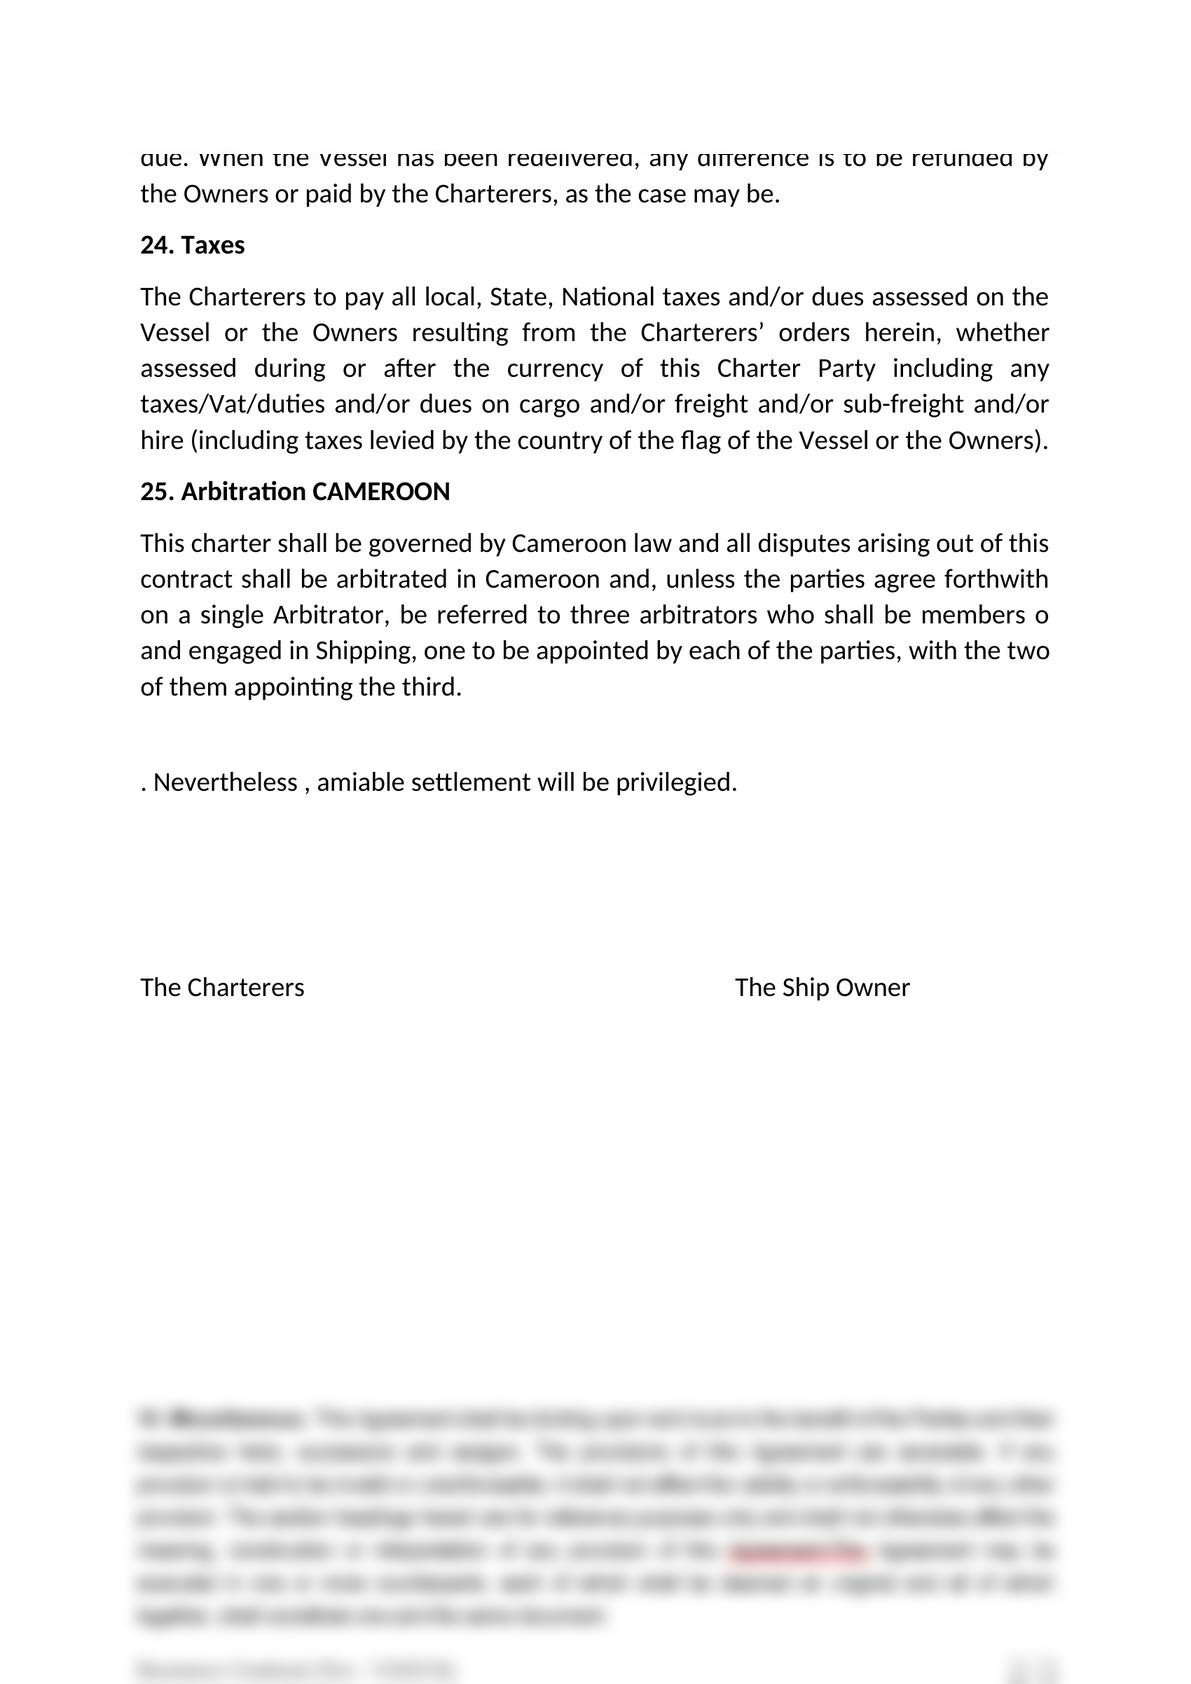 charter party agreement in cameroon-10